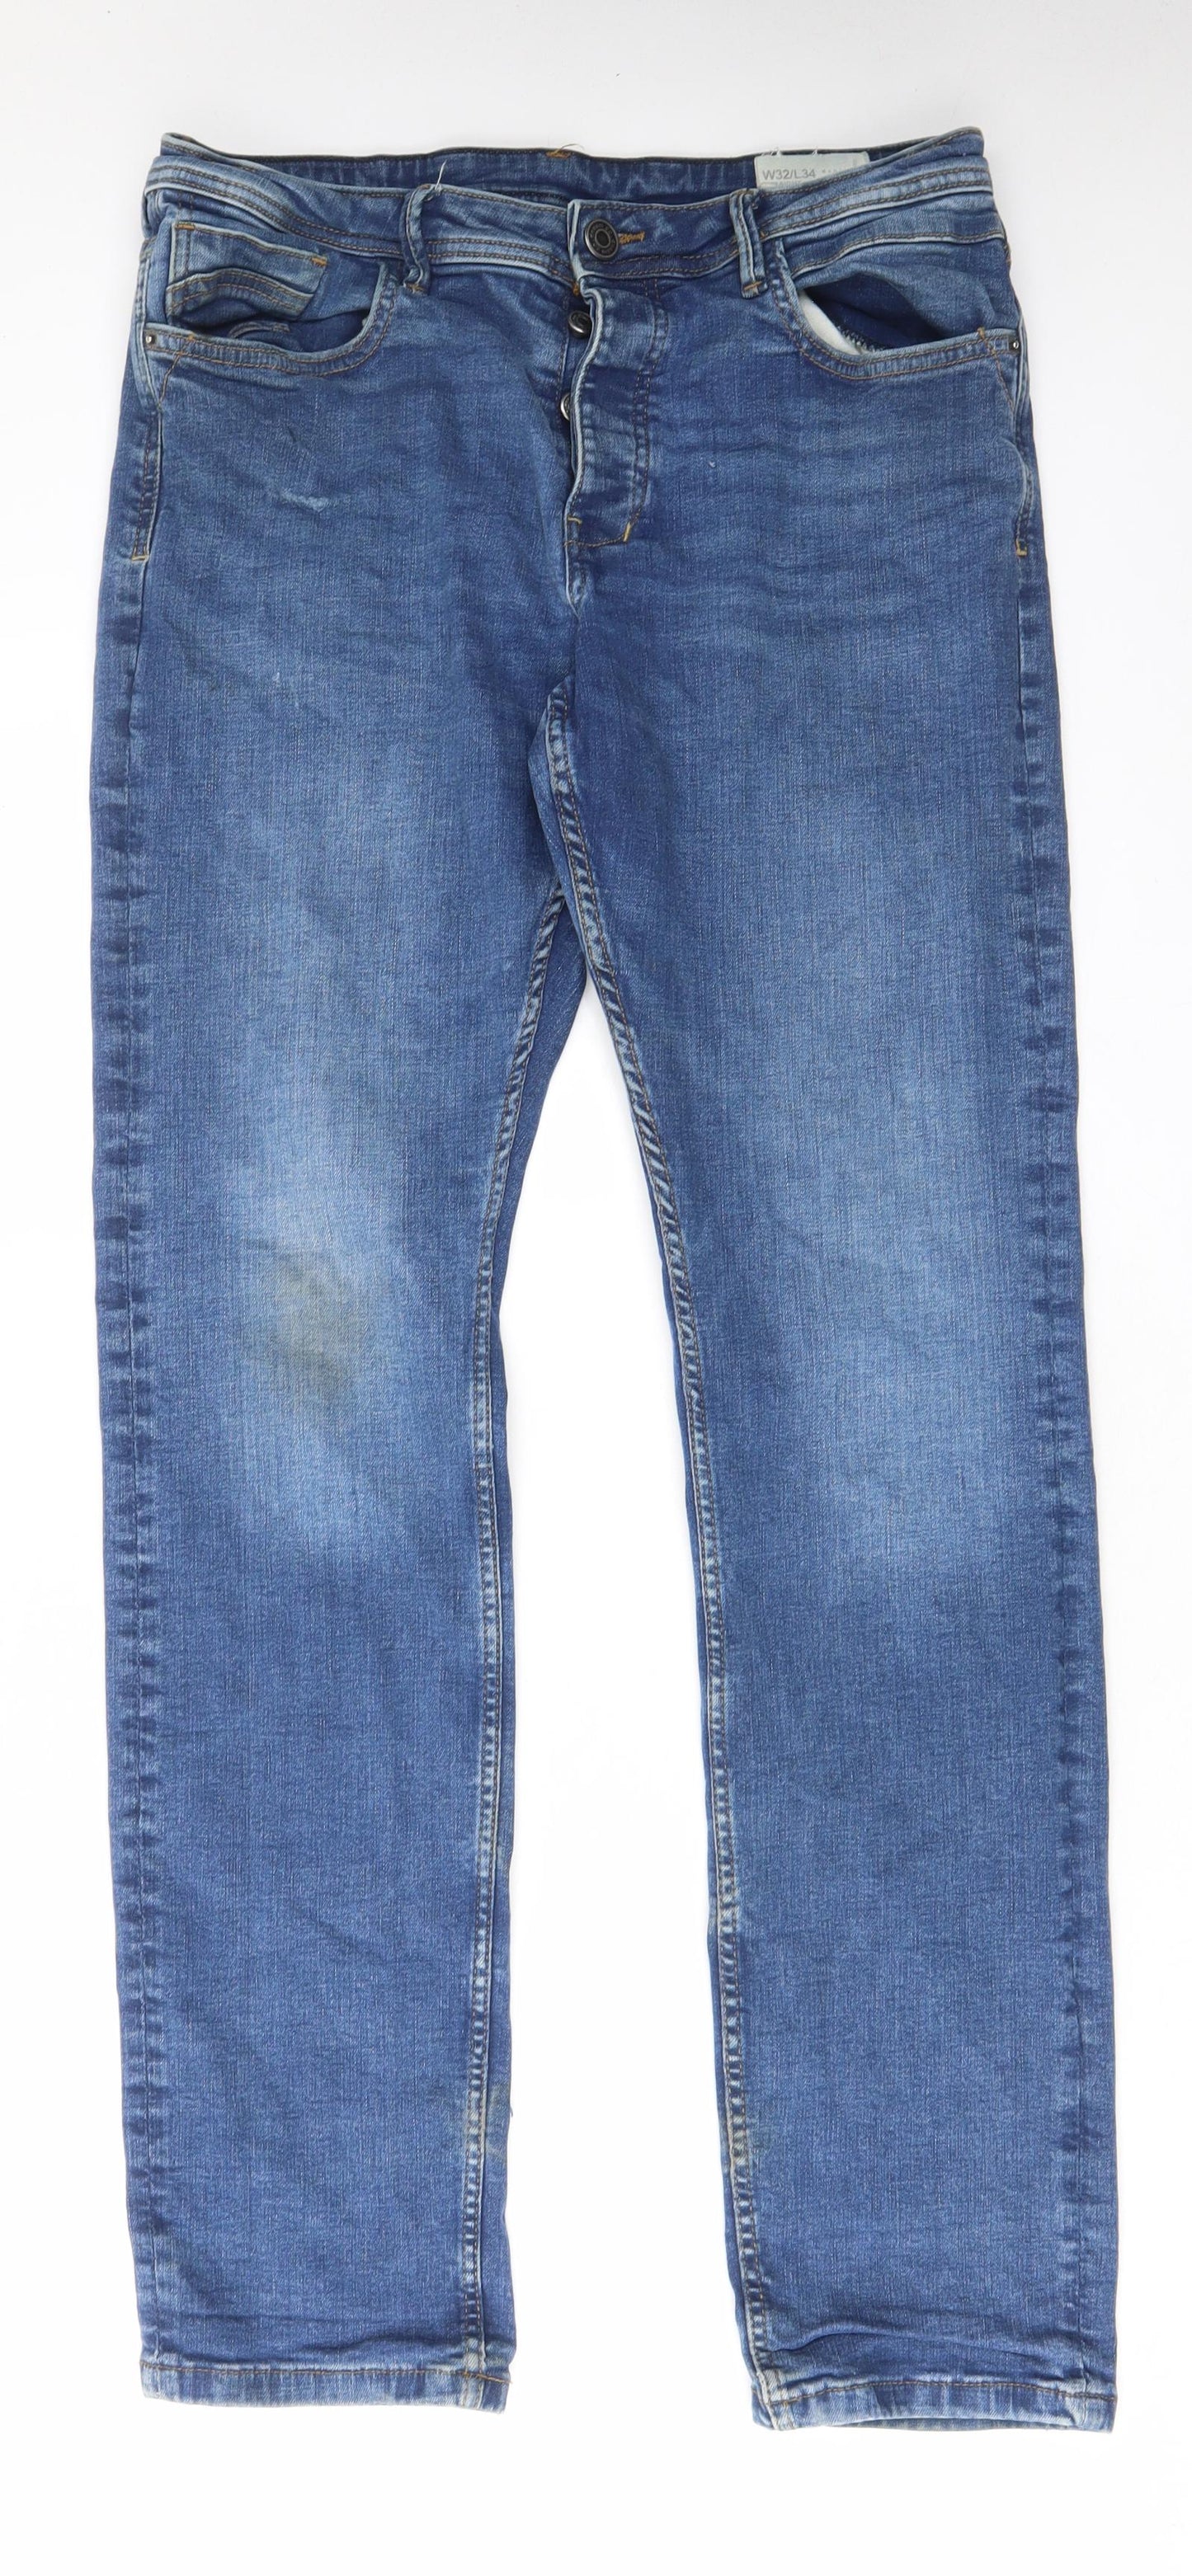 Denim & Co. Mens Blue Cotton Straight Jeans Size 32 in L34 in Regular Button - Pockets, Belt Loops